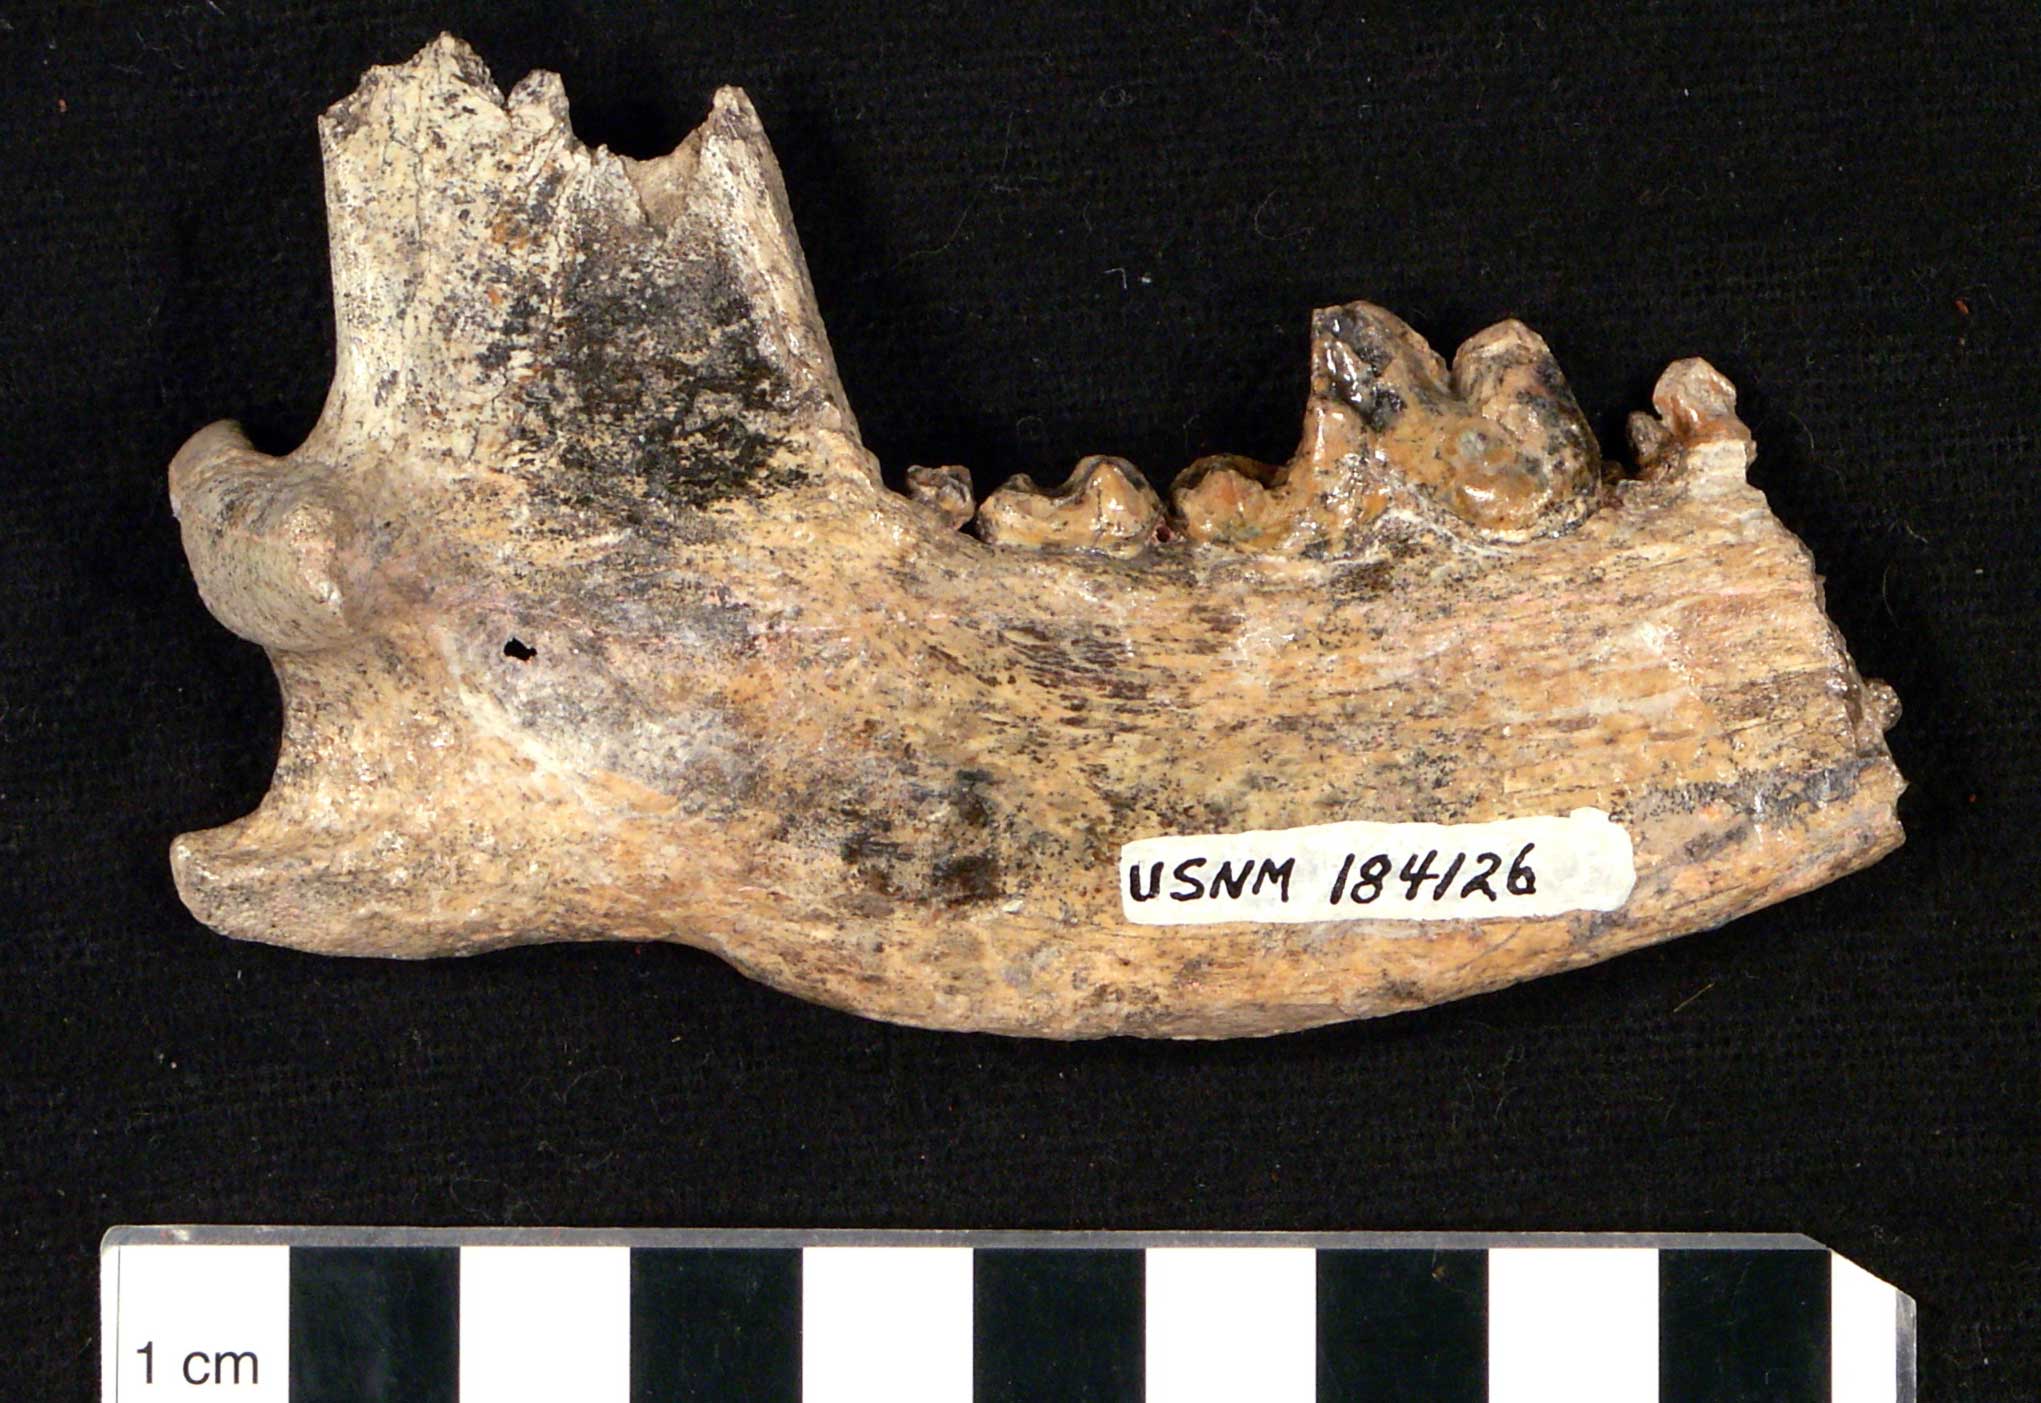 Photograph of the lower jaw of an Edward's wolf from the Pleistocene Bruneau Formation of Idaho. The photo shows one side of a jaw, the with hinge toward the left and the tip (which has been broken off) to the right. A few molars are in the jaw. Total length is about 10 centimeters based on the scale at the bottom of the photo.